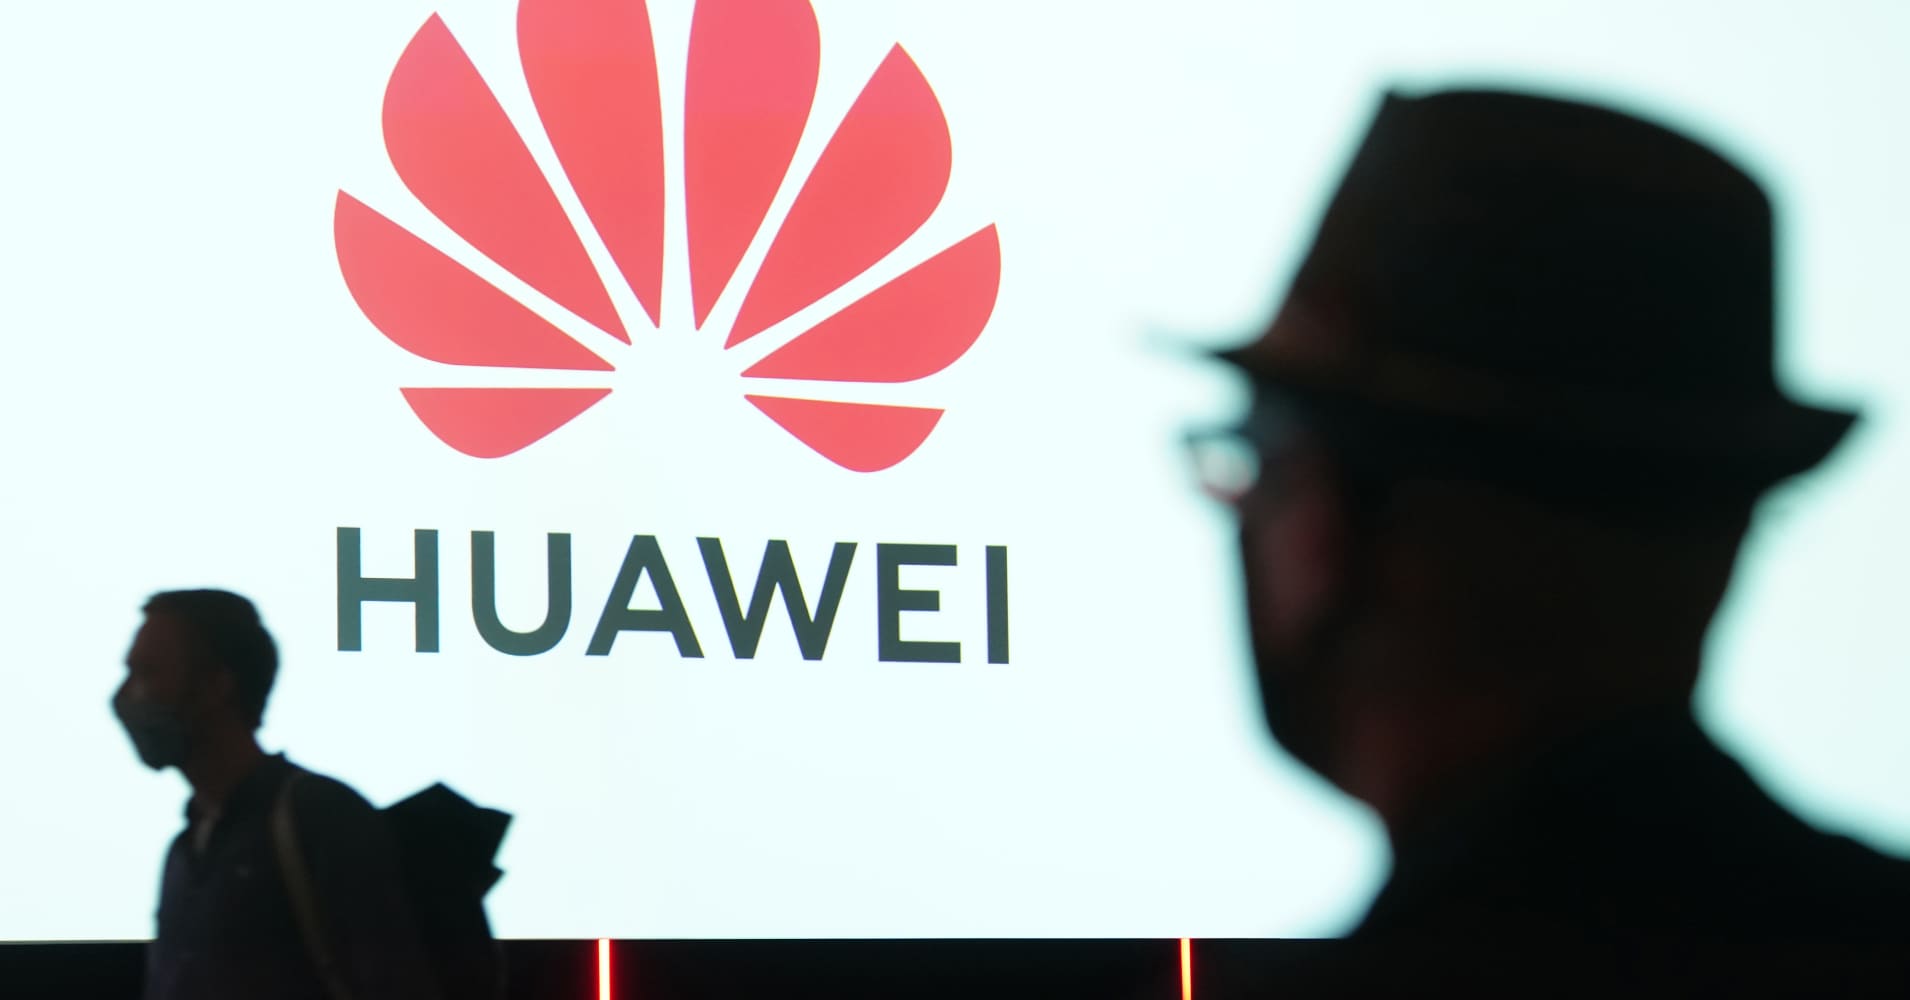 u.s. revokes some export licenses to sell chips to huawei in a bid to curb china's tech power